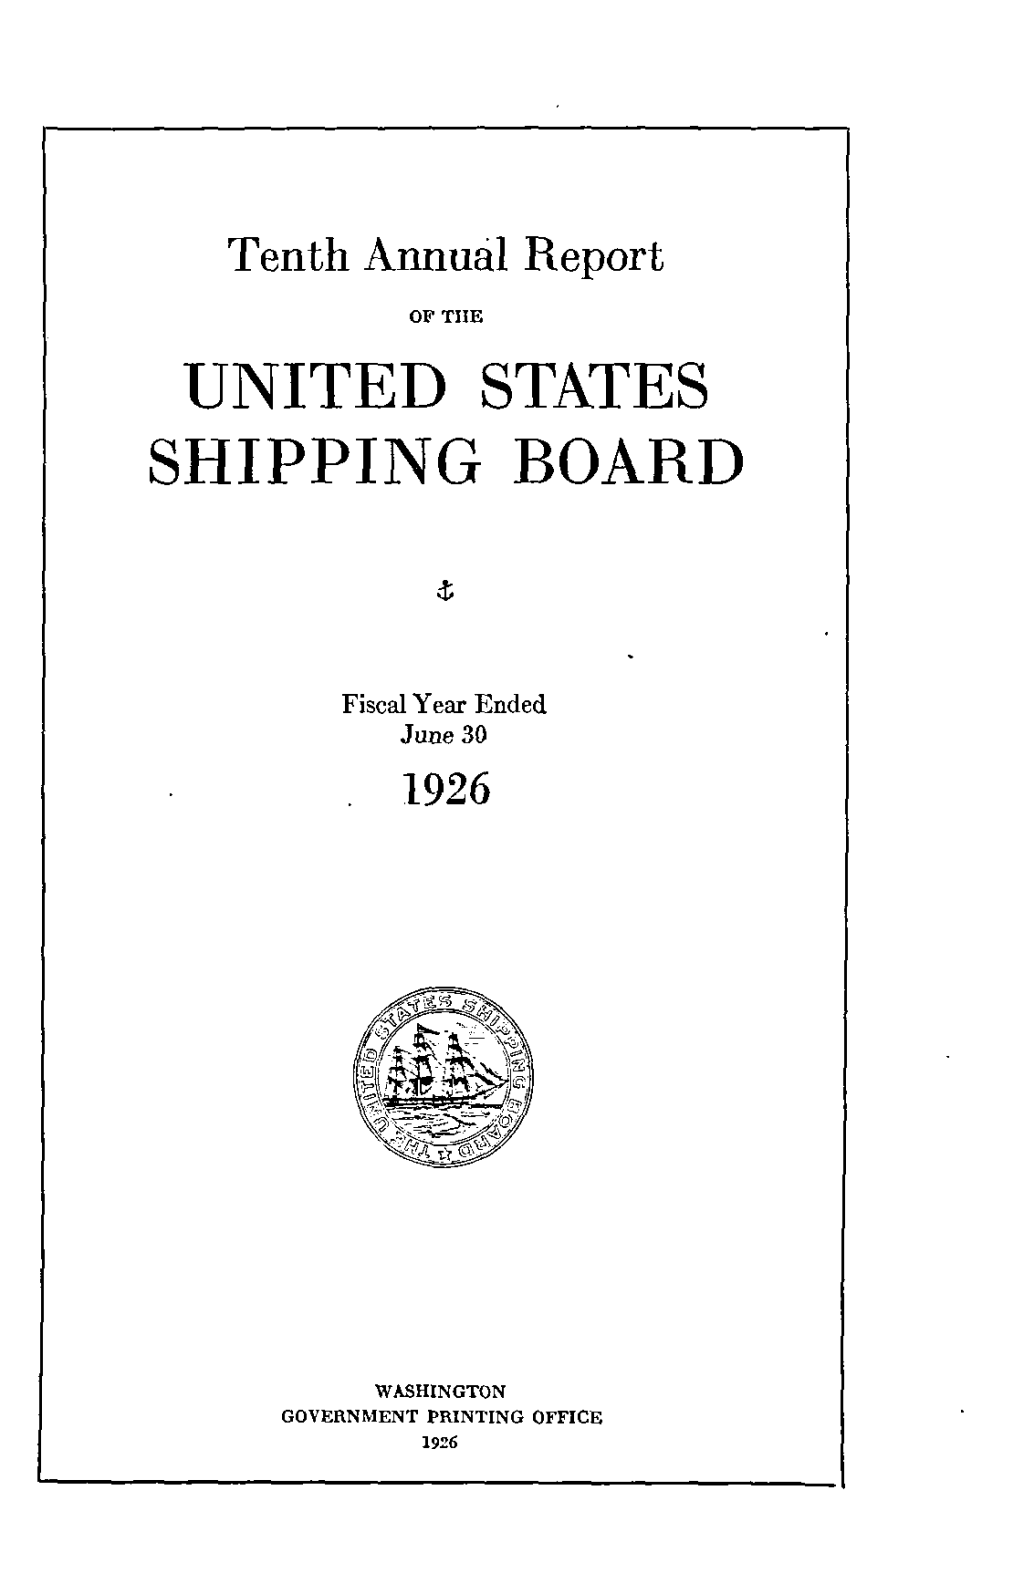 Annual Report for Fiscal Year 1926